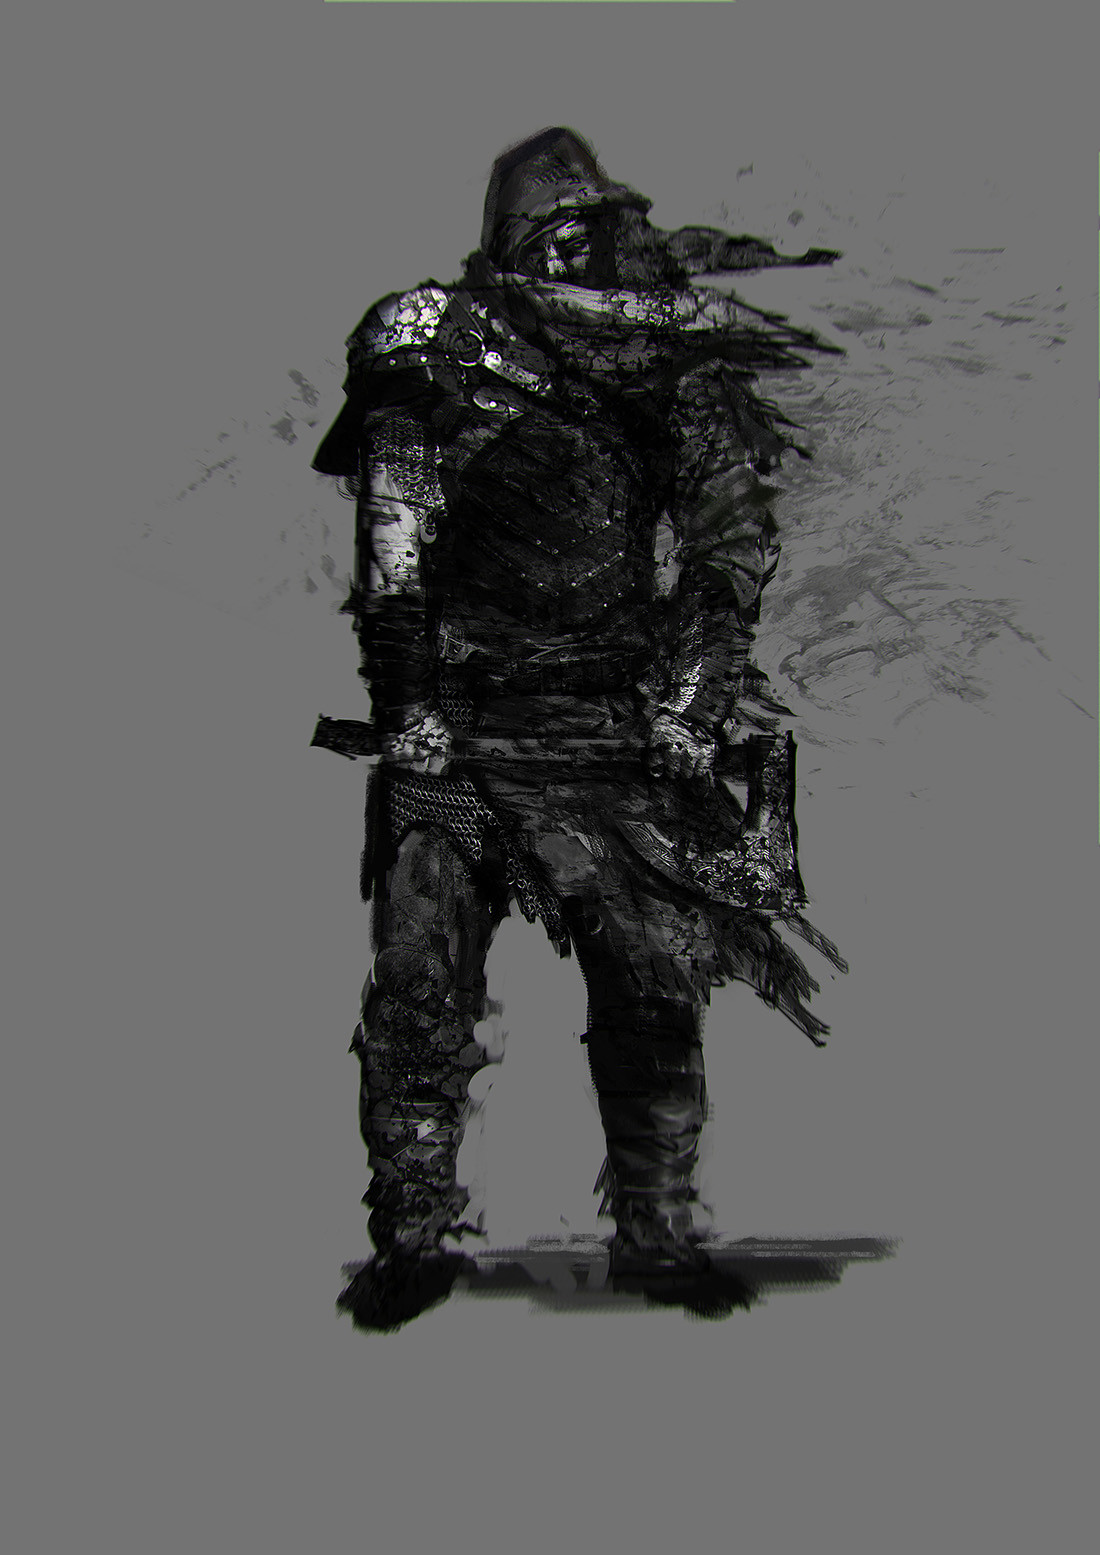 Witch Hunter Concept Art